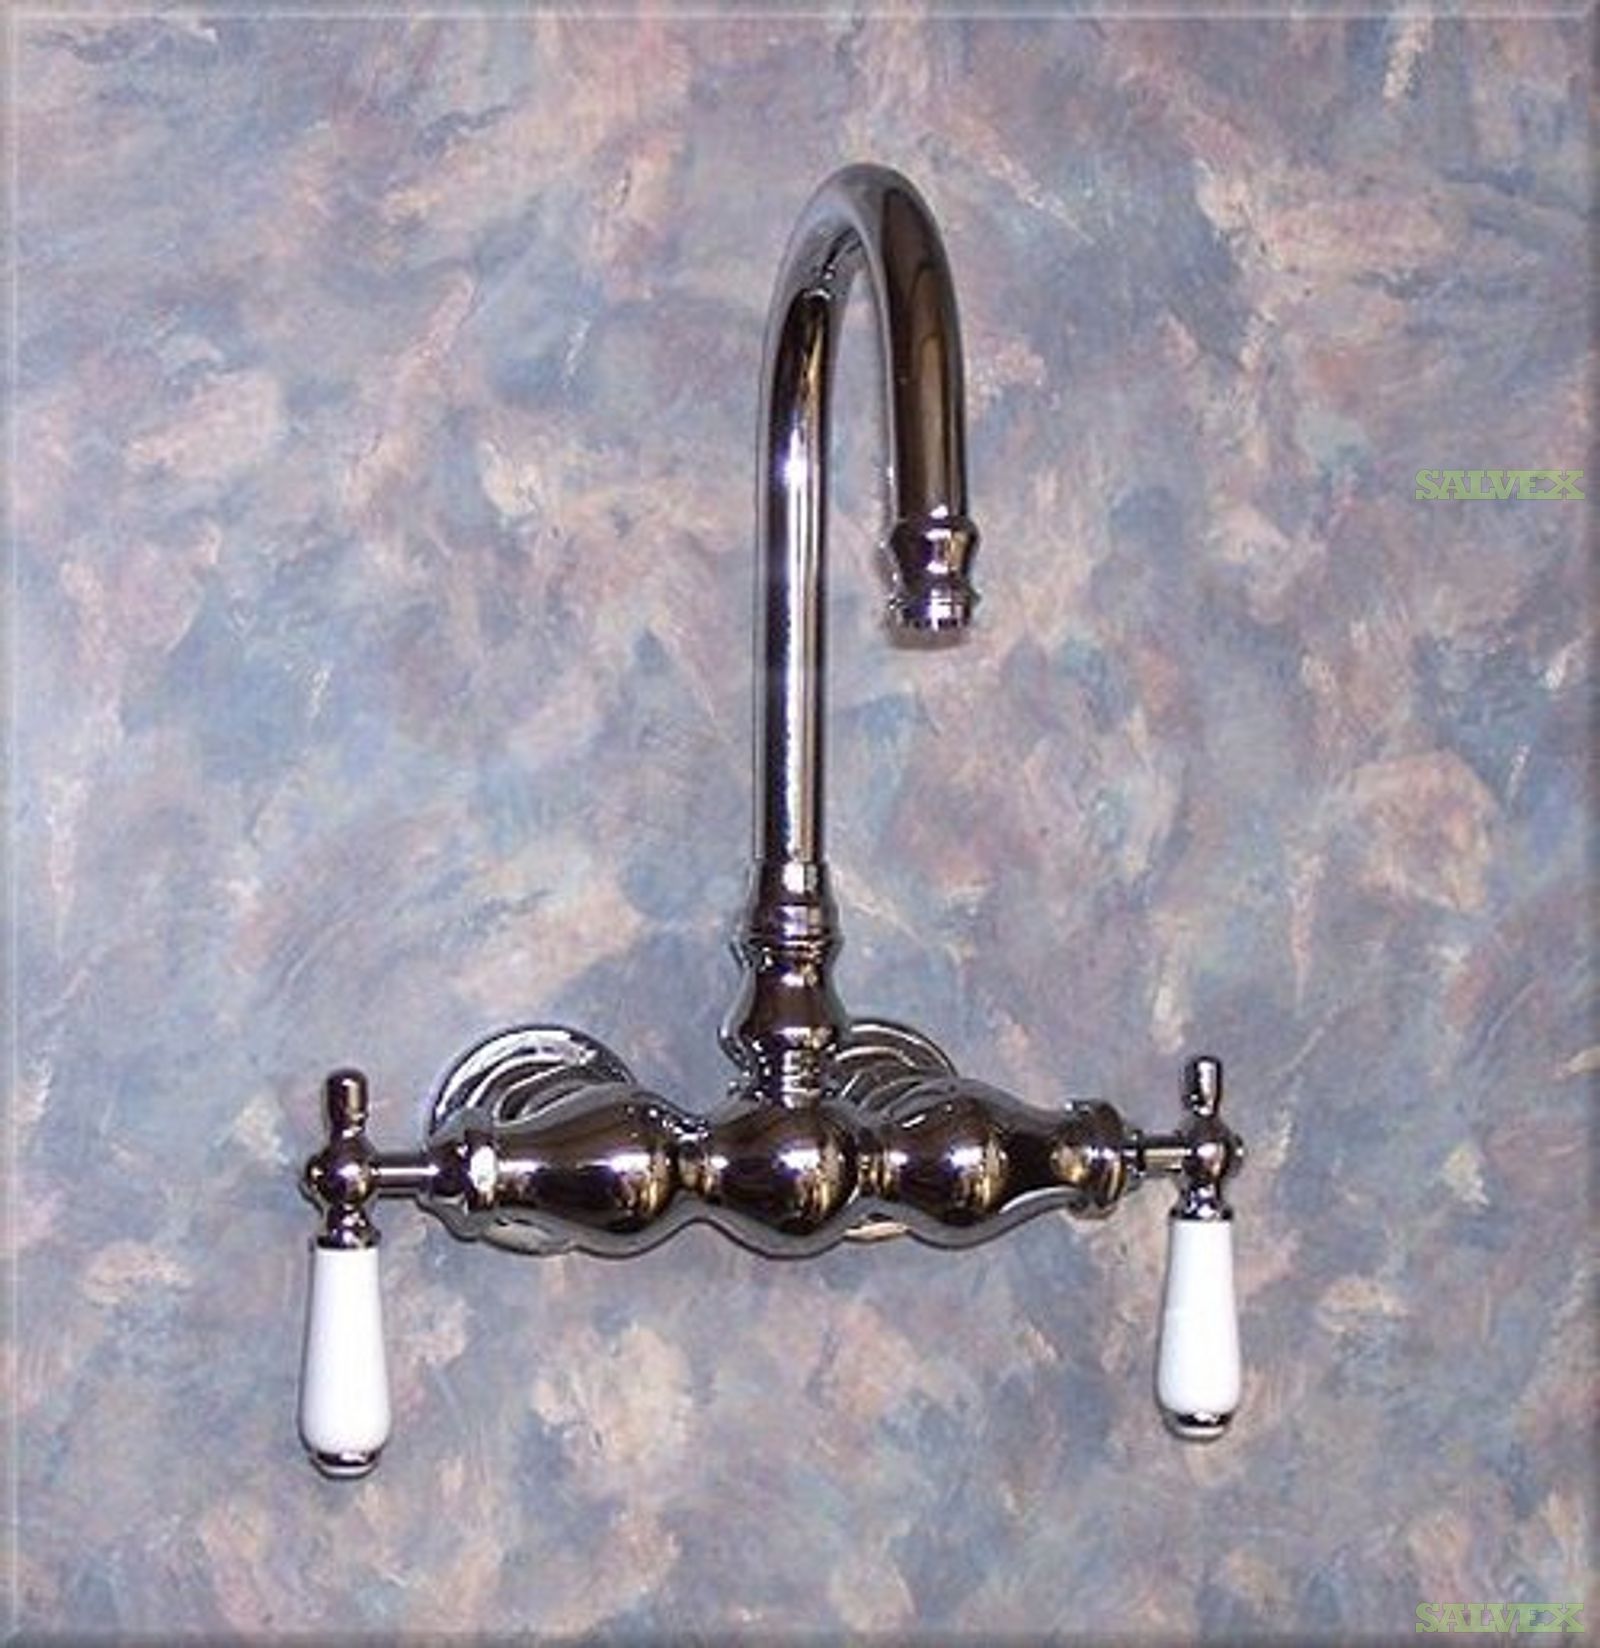 Hardware: Claw Foot Tub Faucets, Fitting, Overflow, Valves and more (Chrome finishing) / 135 Units